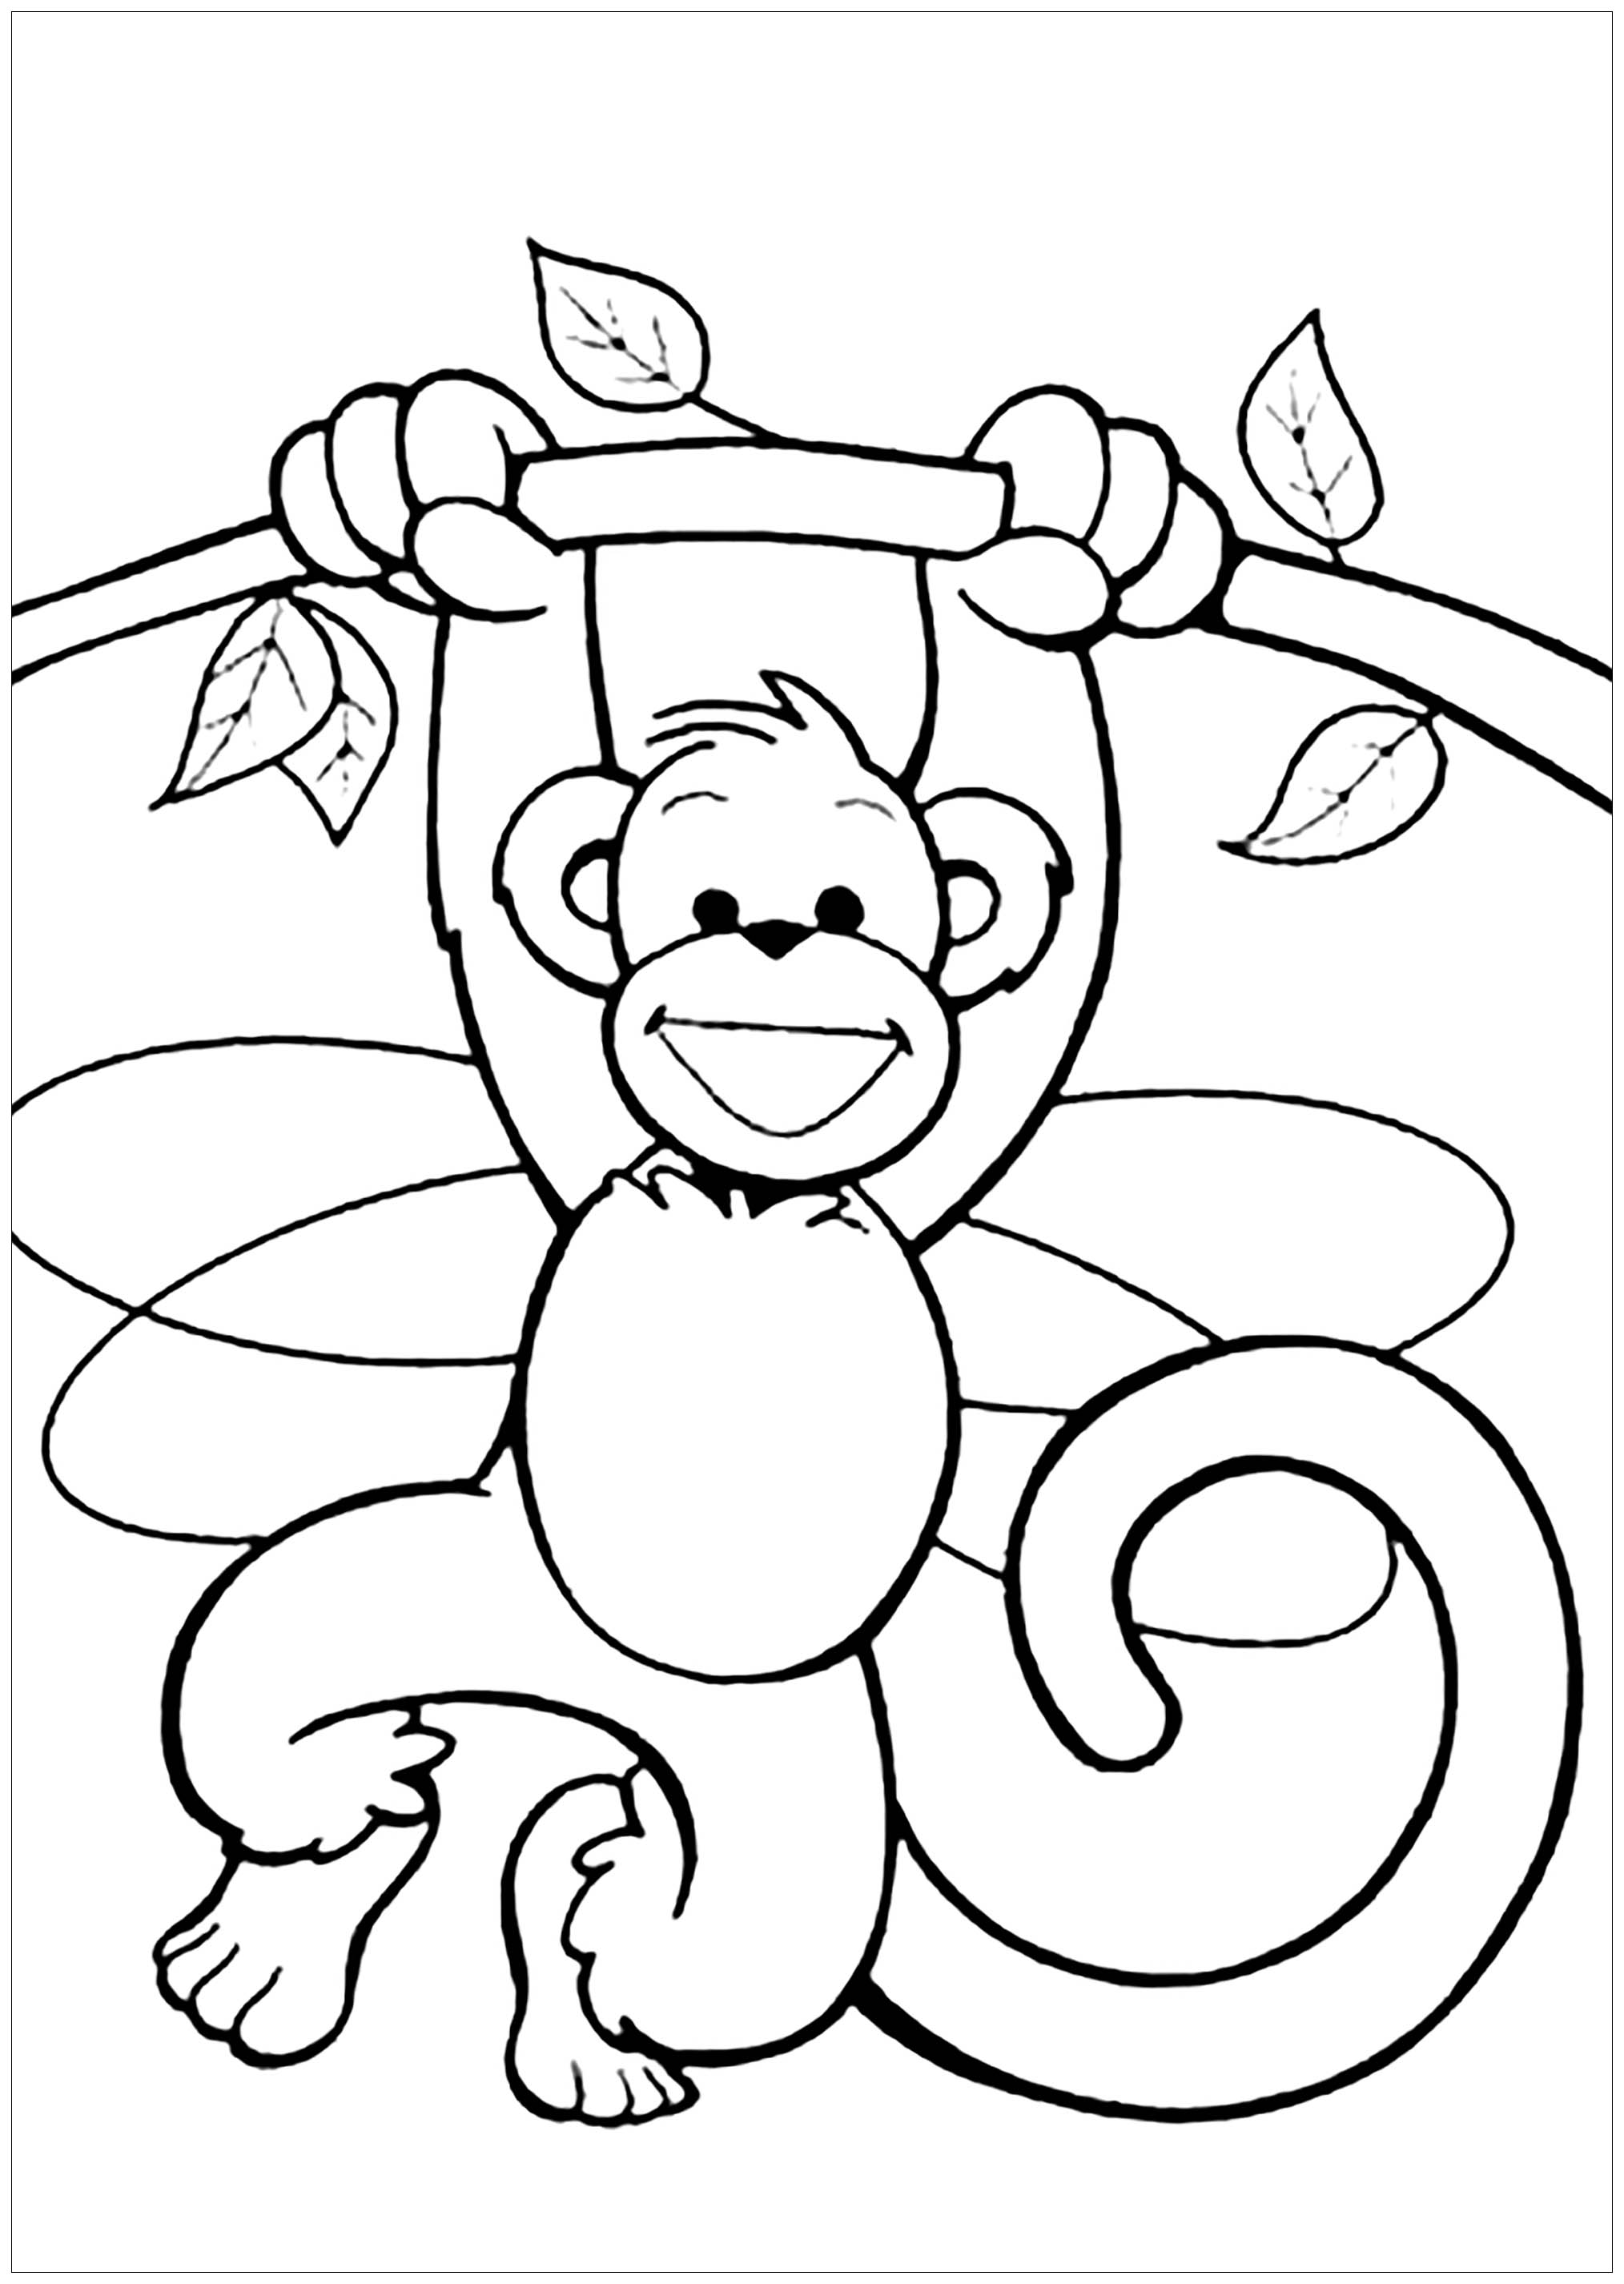 monkey-coloring-pages-to-print-monkeys-kids-coloring-pages